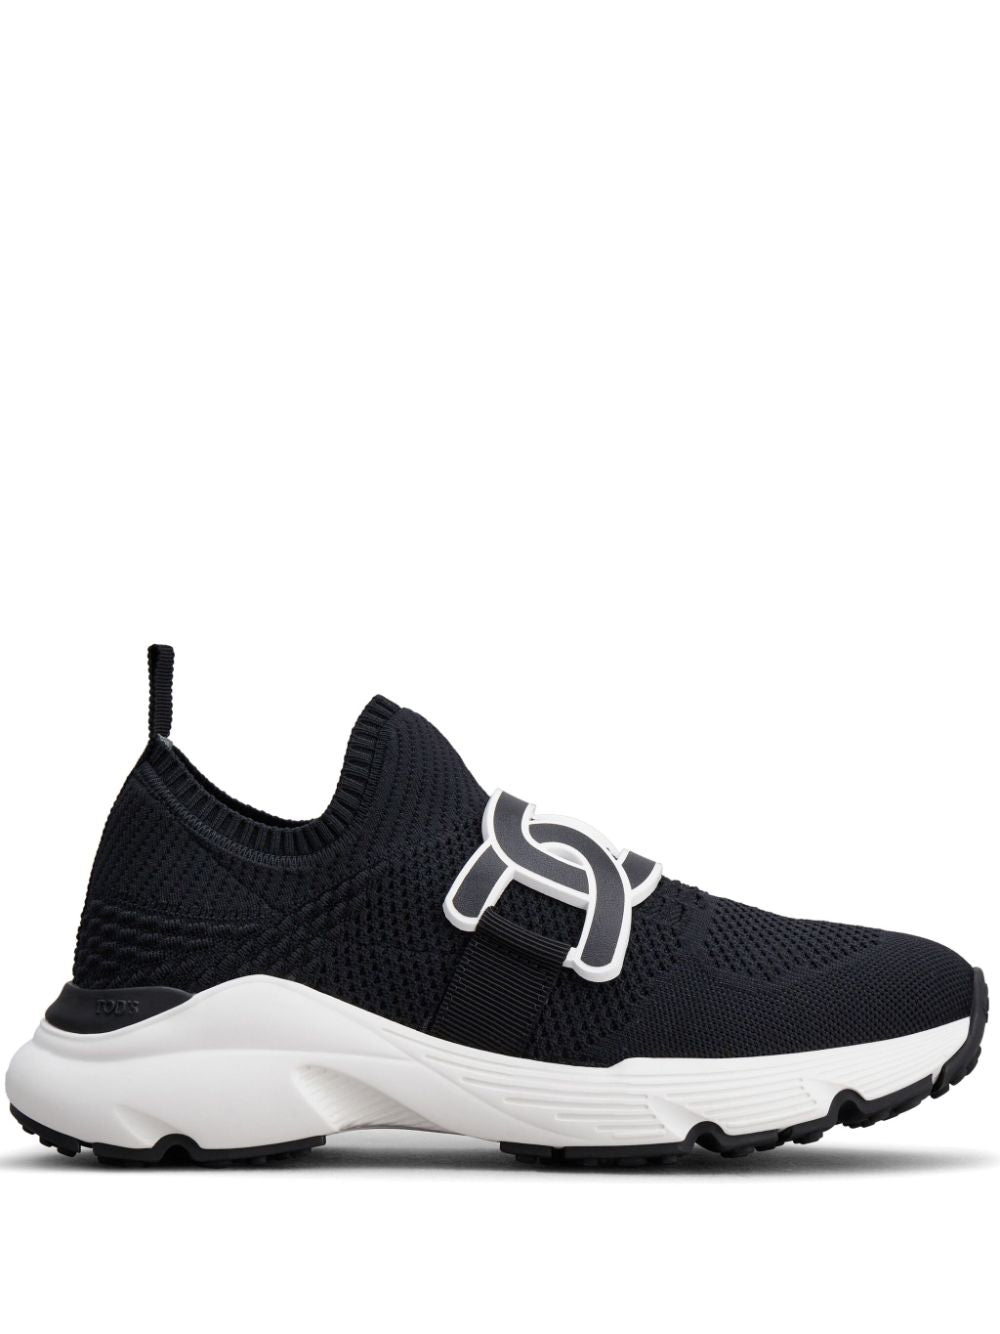 TOD'S Black Knit Slip-On Sneakers for Women with Appliqué Logo and Chunky Sole